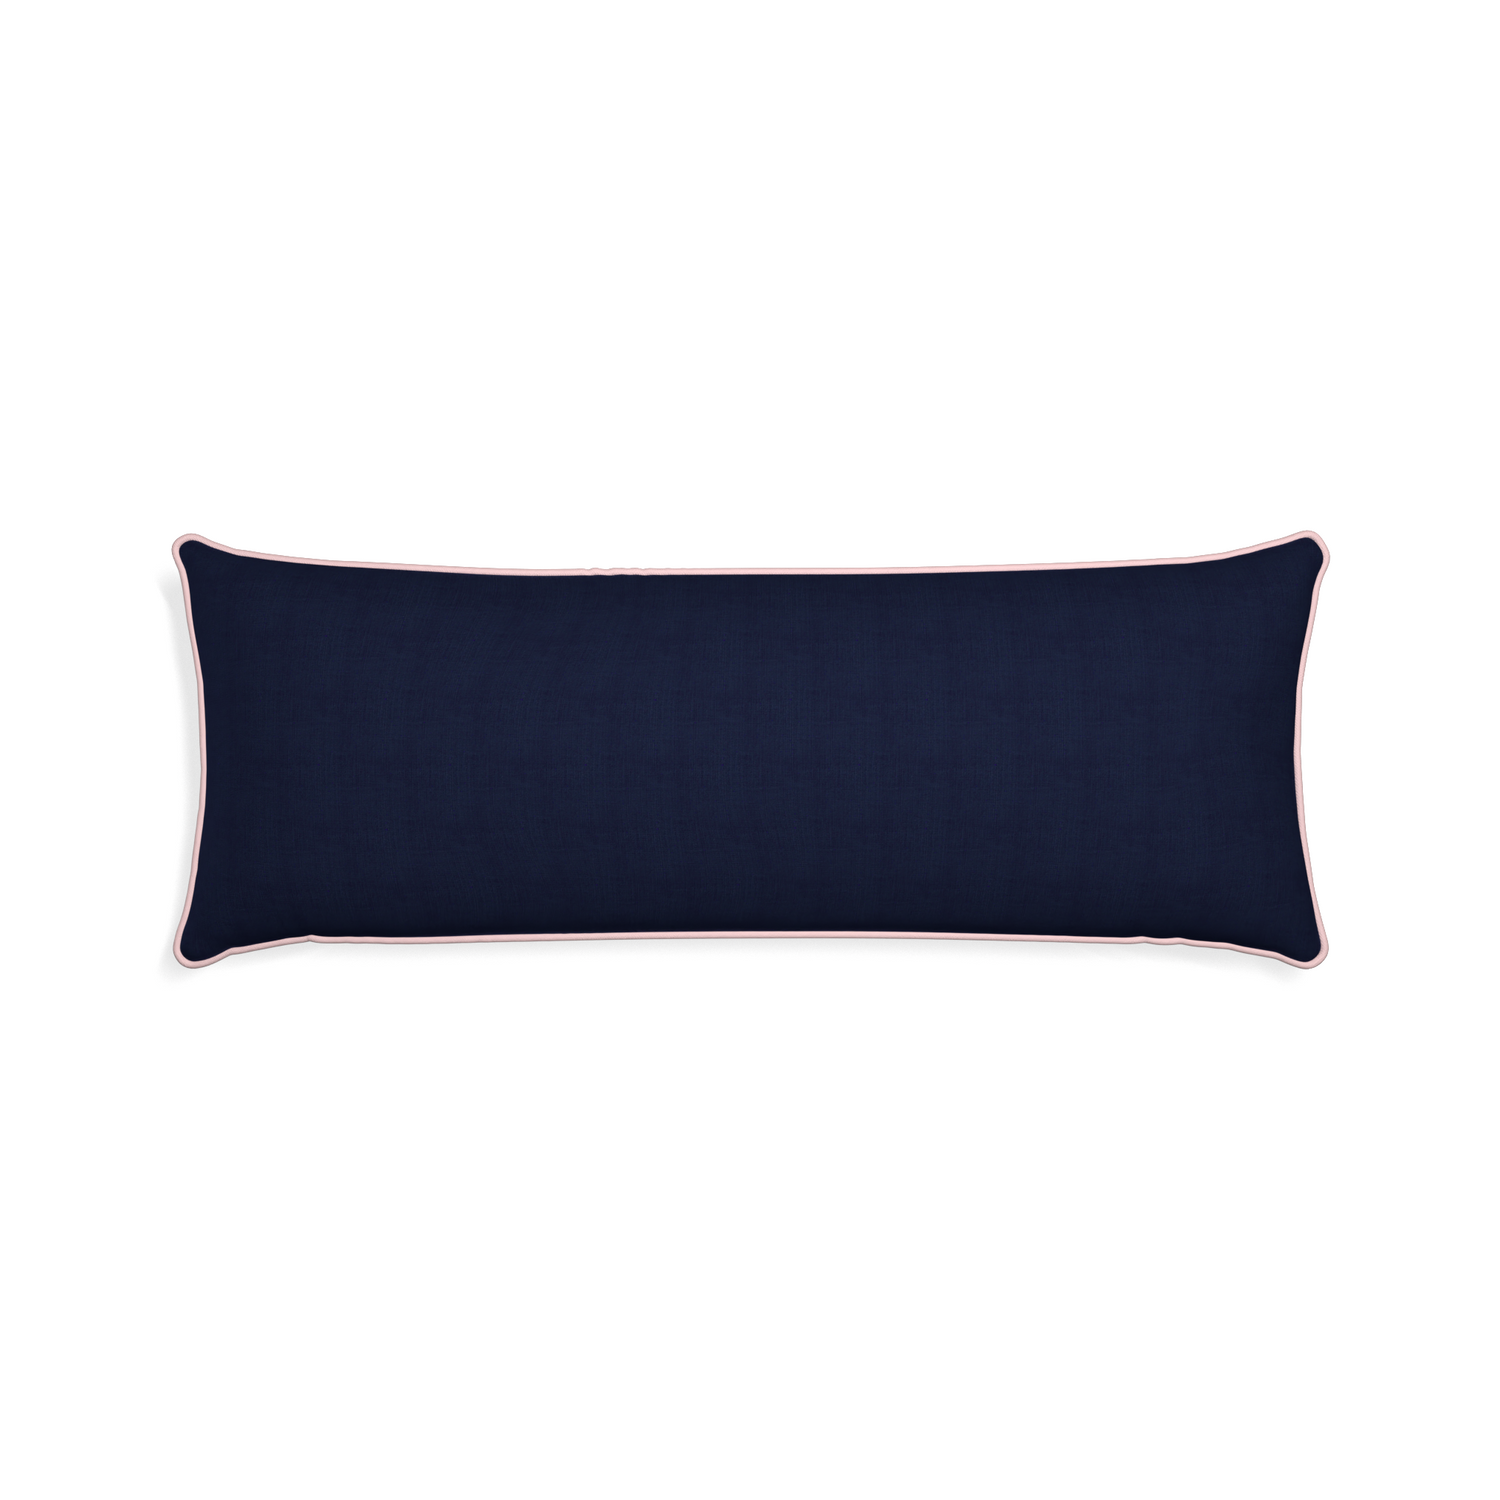 Xl-lumbar midnight custom pillow with petal piping on white background